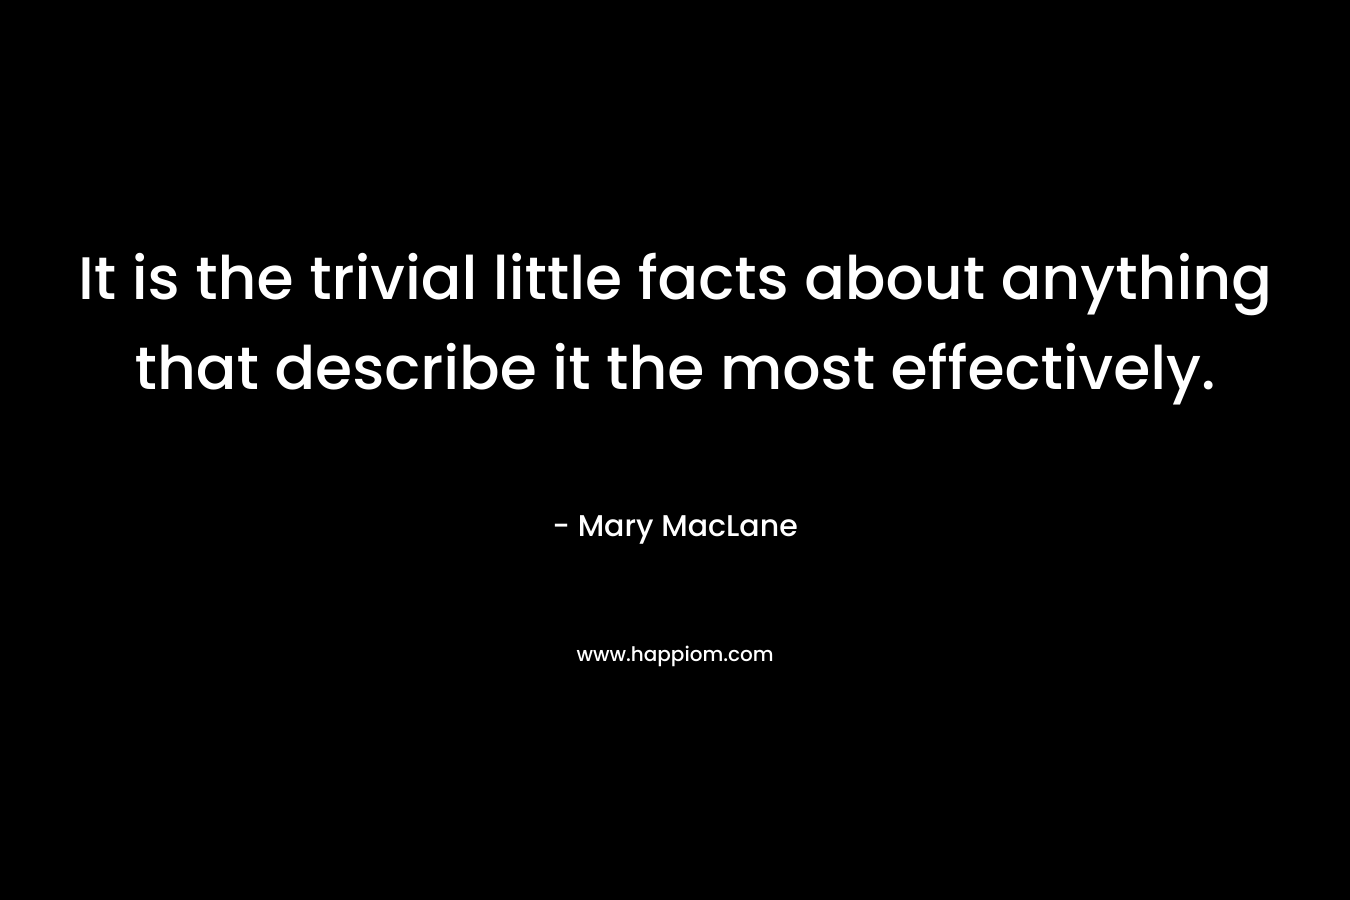 It is the trivial little facts about anything that describe it the most effectively. – Mary MacLane